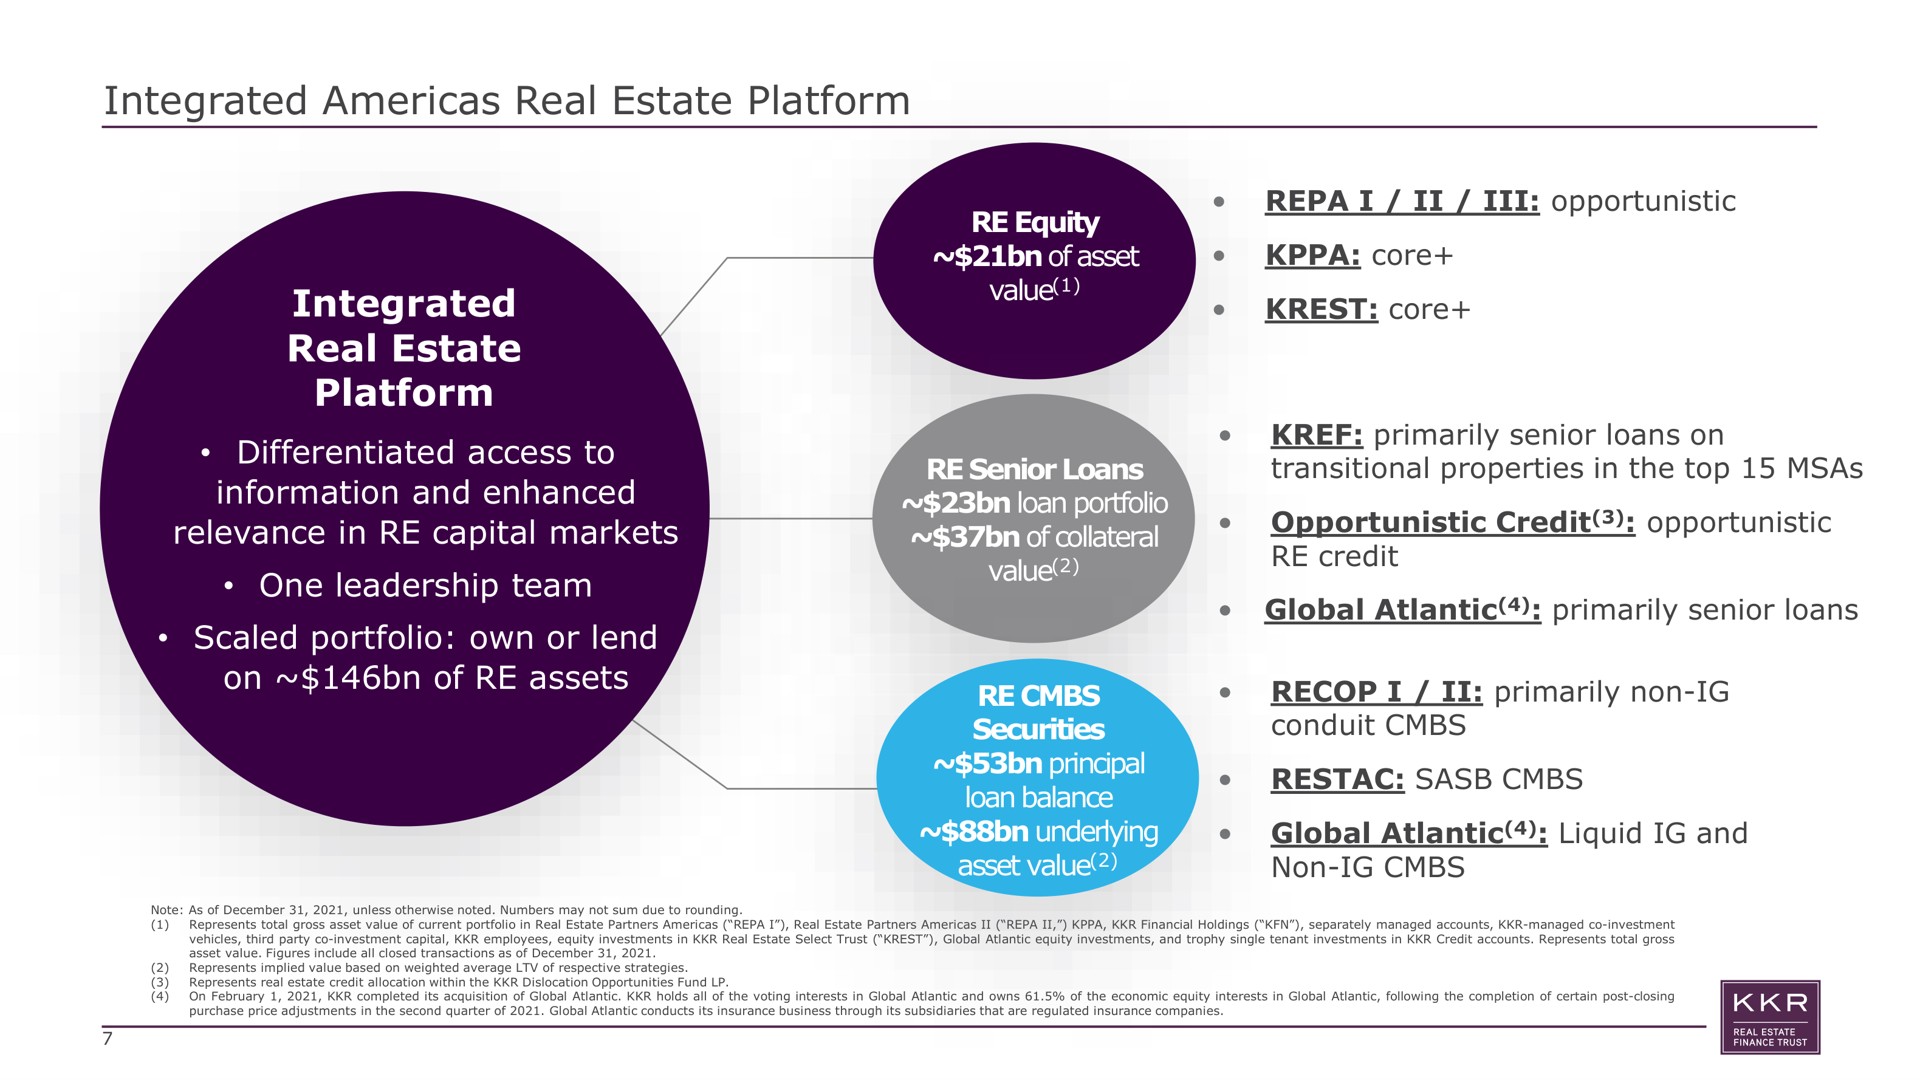 integrated real estate platform integrated real estate platform differentiated access to information and enhanced relevance in capital markets one leadership team scaled portfolio own or lend on of assets equity of asset value i opportunistic core core senior loans loan portfolio of collateral value primarily senior loans on transitional properties in the top opportunistic credit opportunistic credit global atlantic primarily senior loans securities principal loan balance underlying asset value i primarily non conduit global atlantic liquid and non | KKR Real Estate Finance Trust